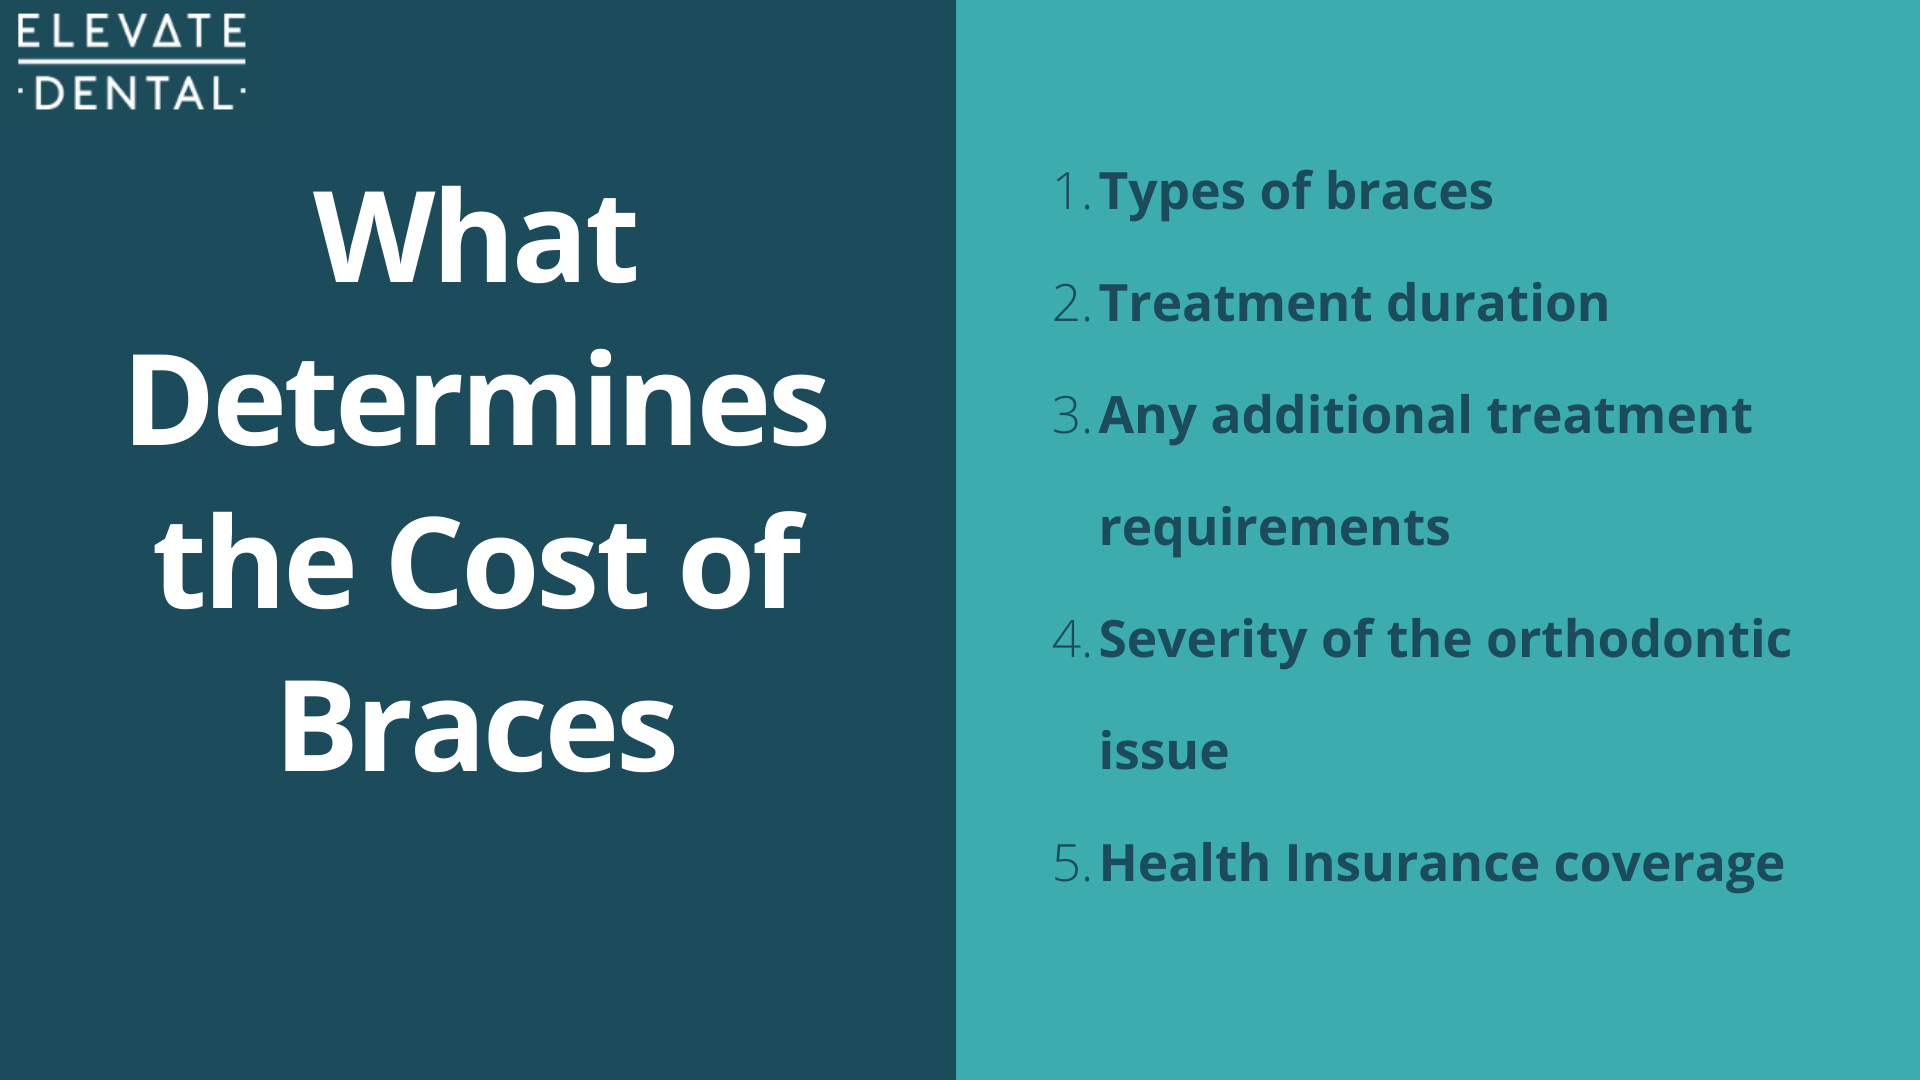 What Determines the Cost of Braces